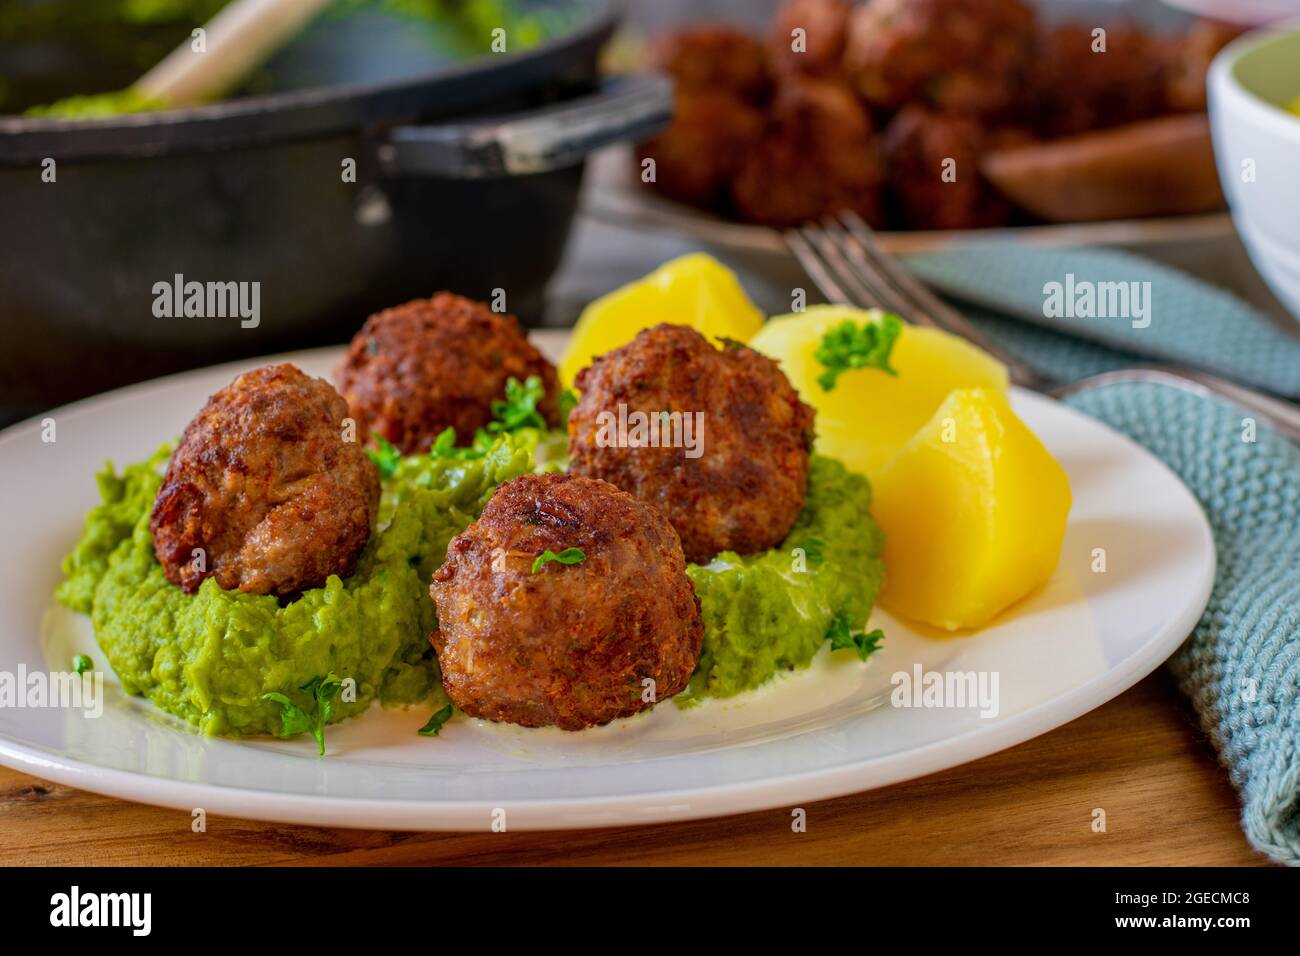 Fried meatballs with pea puree and potatoes on a plate with kitchen table background. Stock Photo